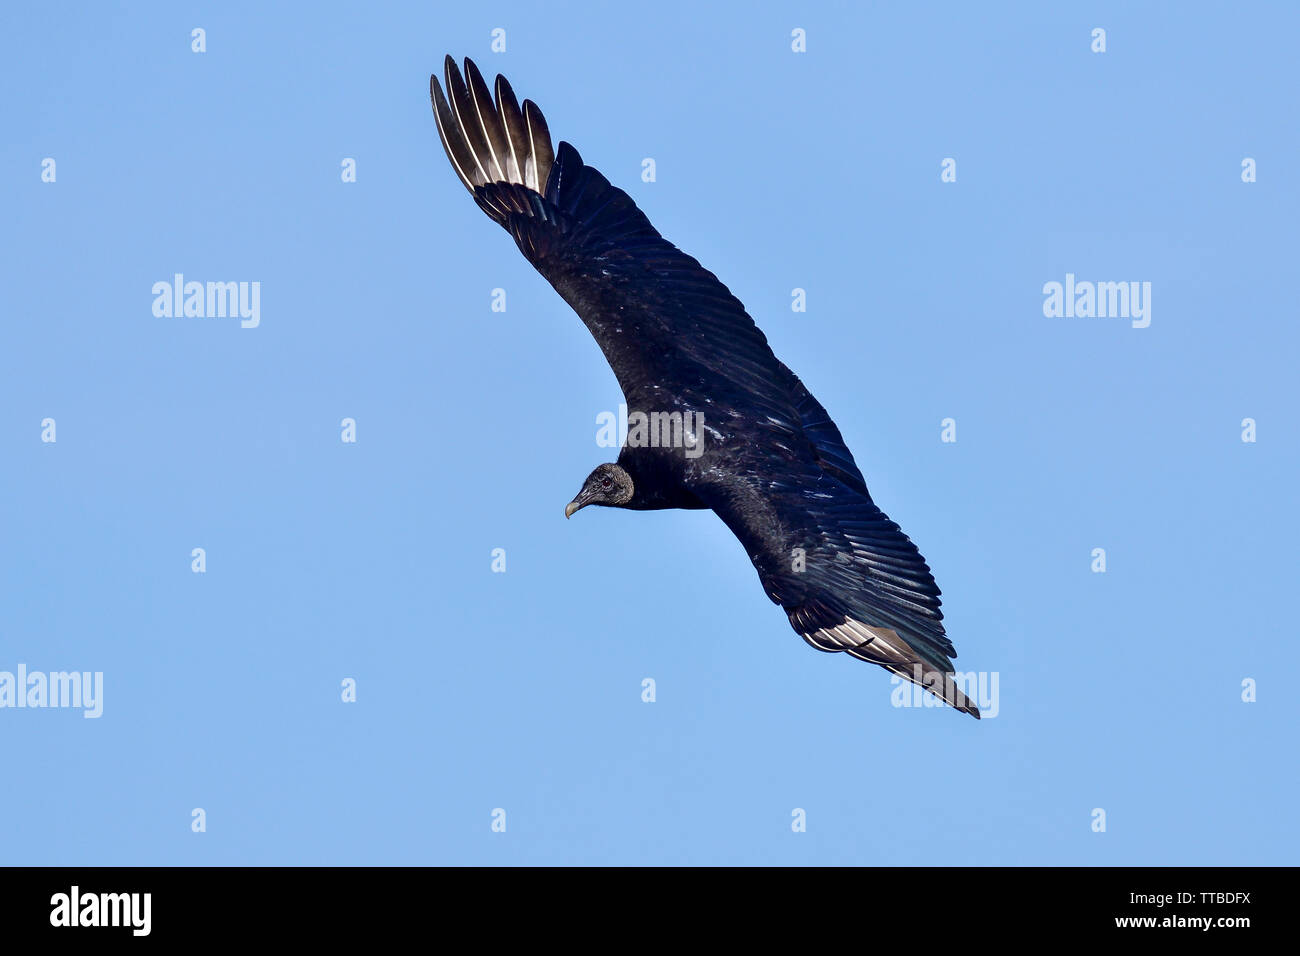 Black vulture is soaring in the sky Stock Photo